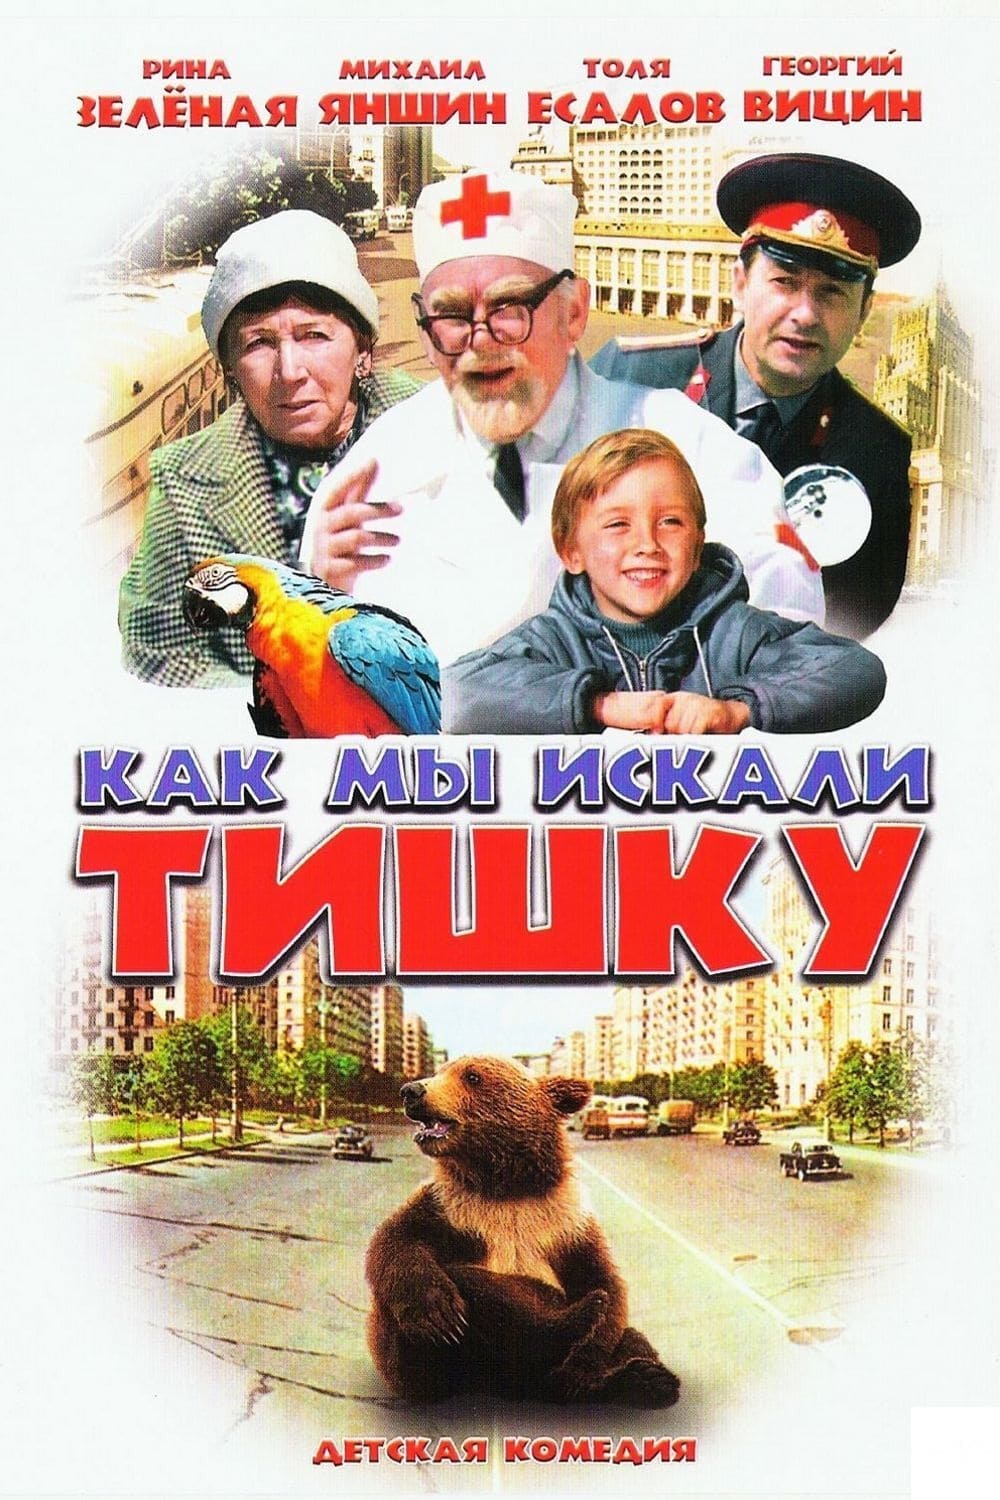 How We Were Searching for Tishka (1971)